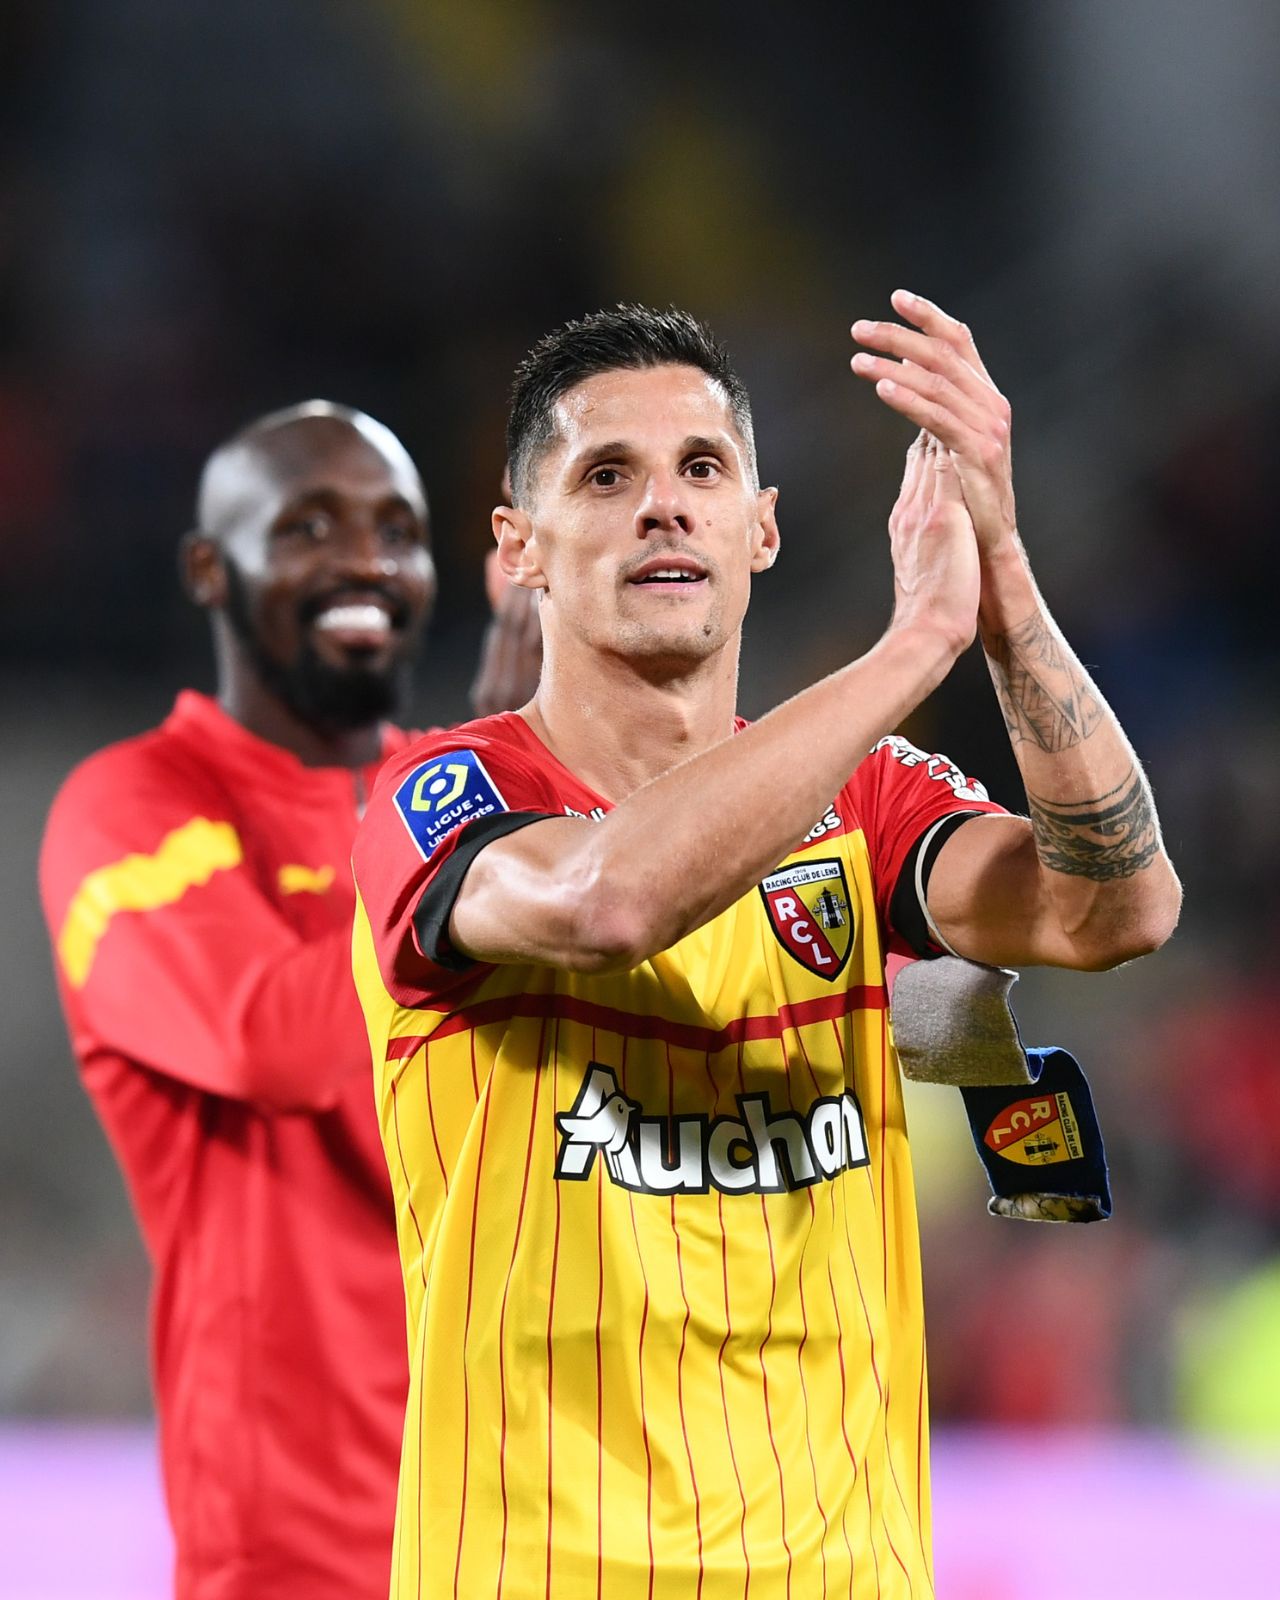 RC Lens, why they are currently 'the best of the rest' in Ligue 1.